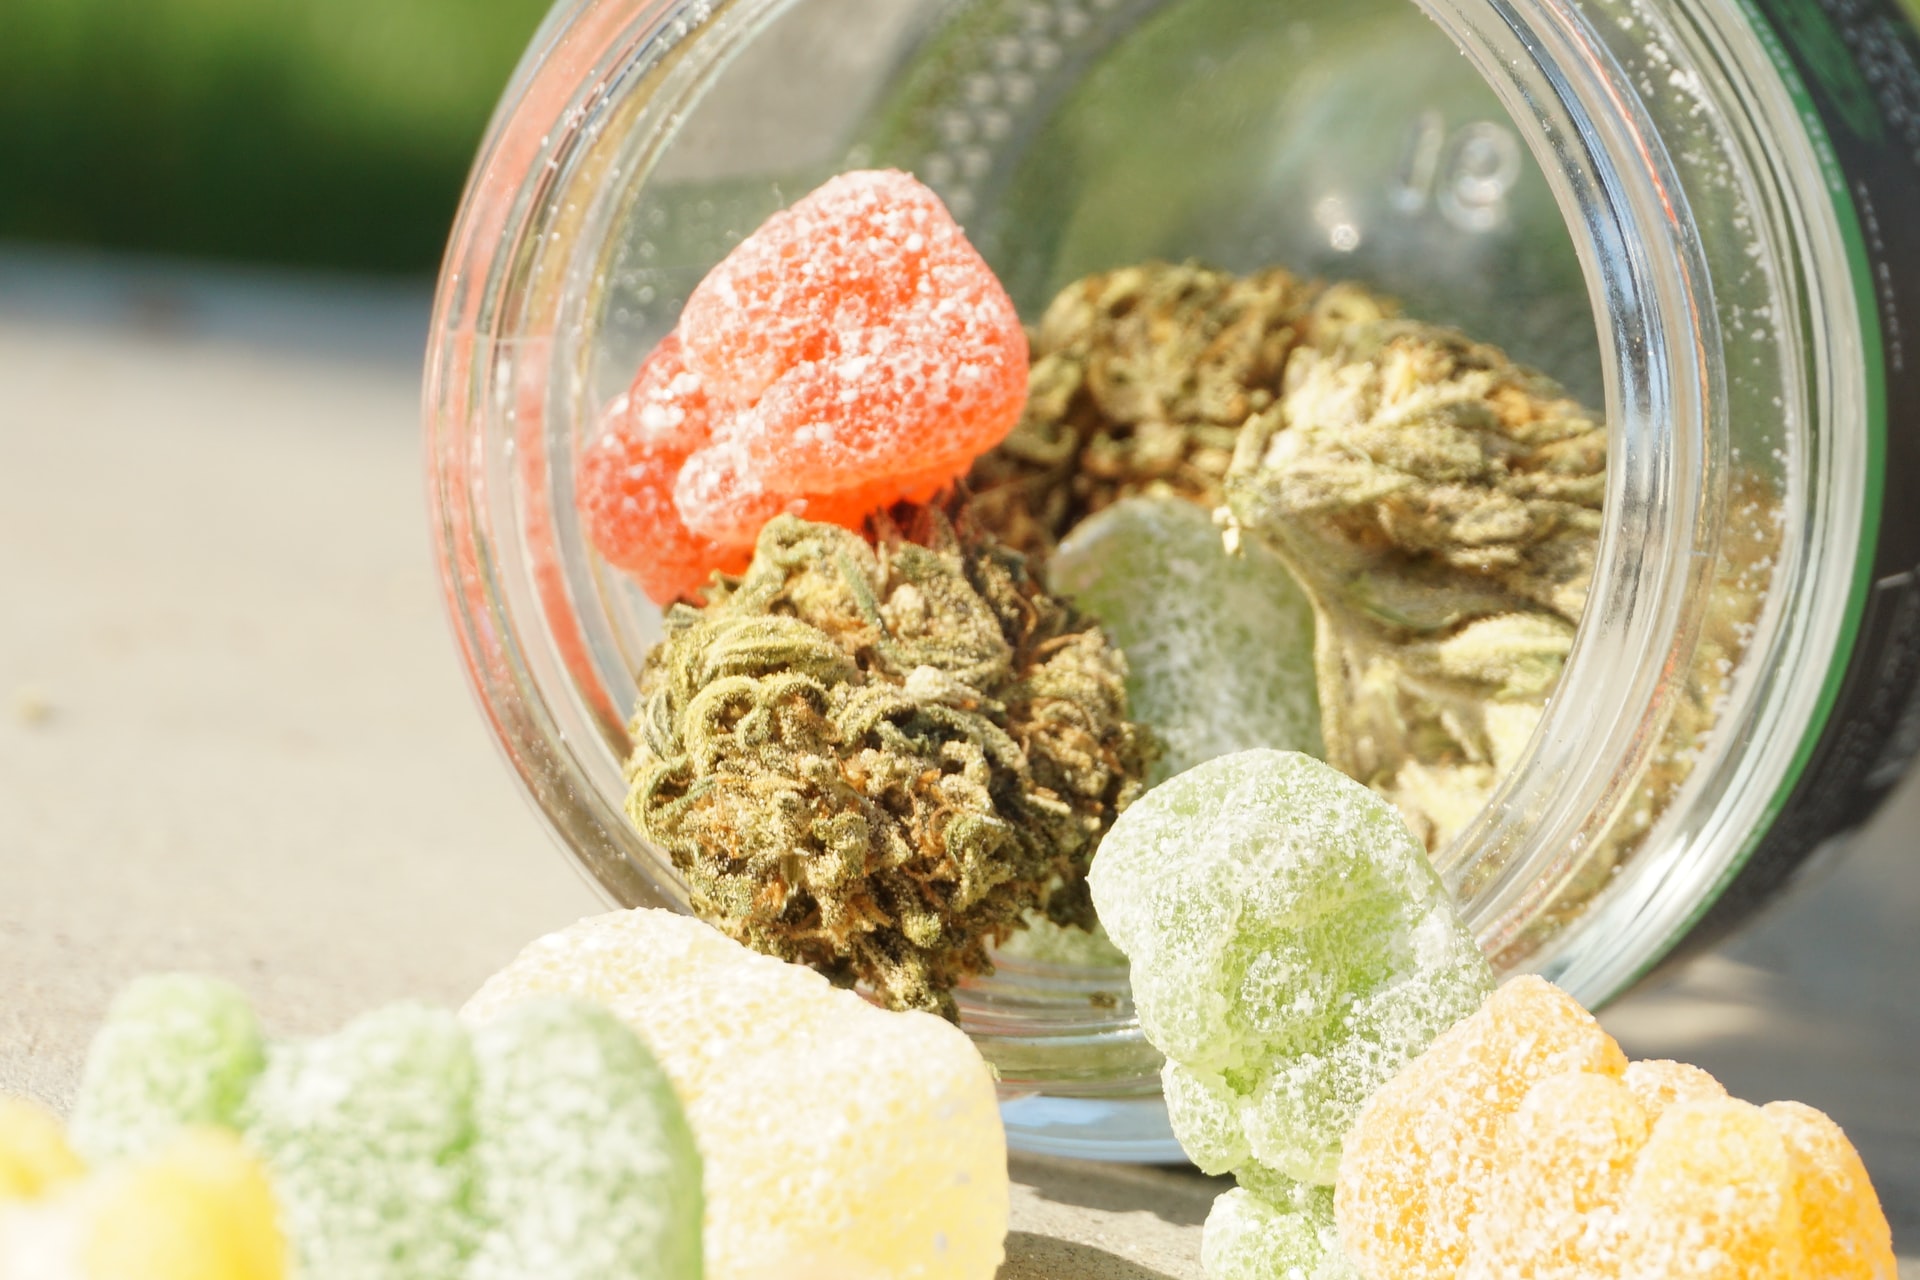 Green and red gummies between a cannabis top in a clear glass bowl